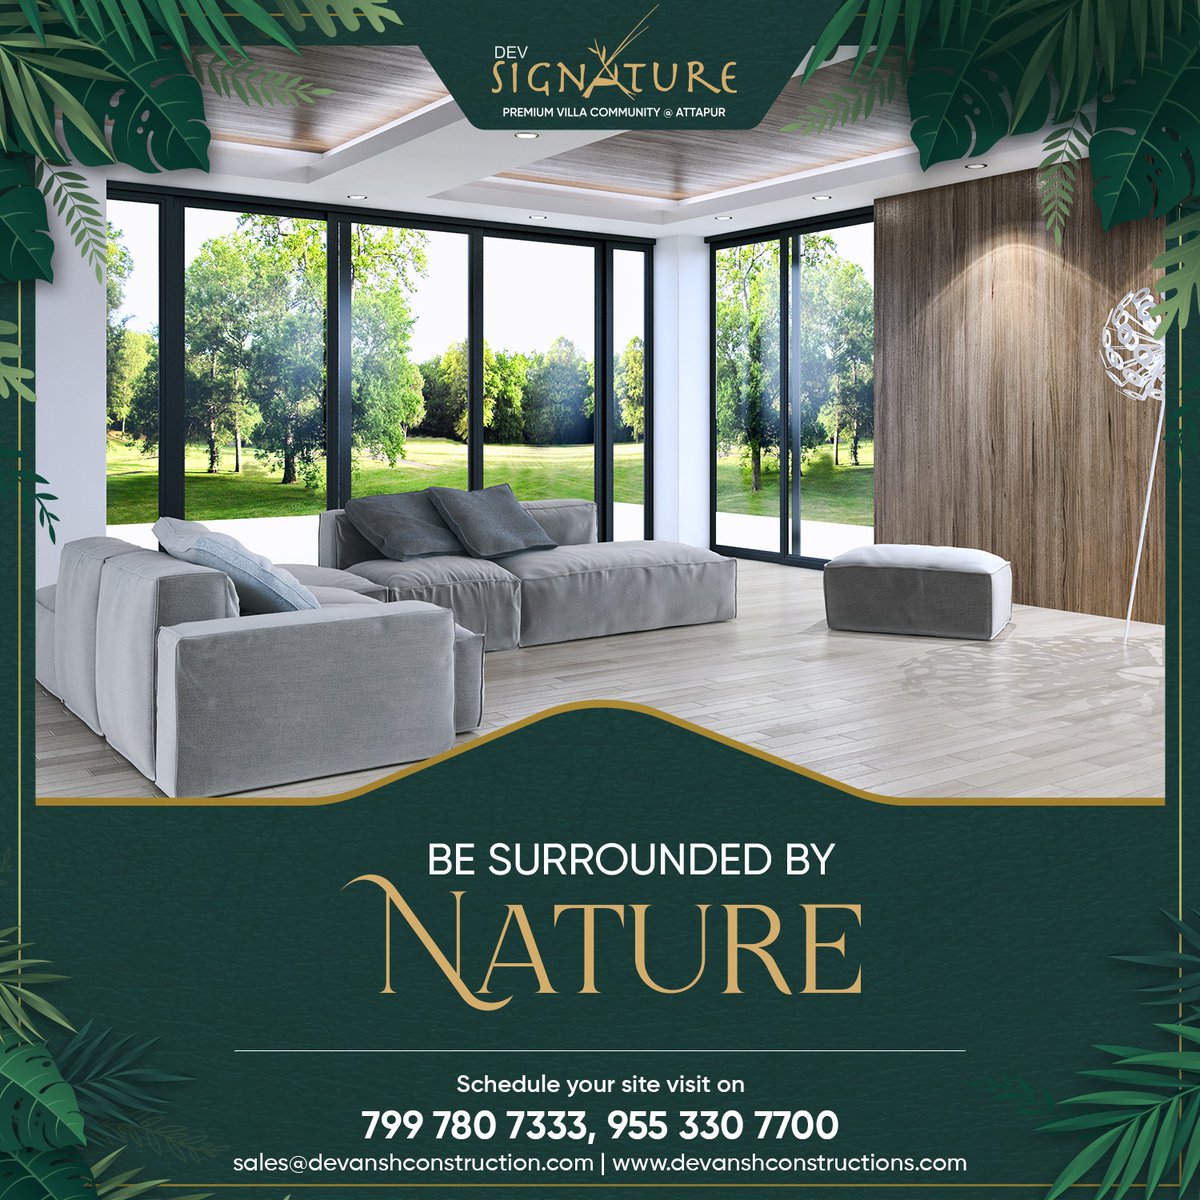 Breathe in the beauty of #sustainableluxury living with greenery all around you. Have you visited the haven for nature-lovers yet?
#futuristicliving #luxuryvillas #realestate #luxuryvilla #hyderabad #attapur #villa #signaturevilla #devanshconstructions #sustainablelifestyle